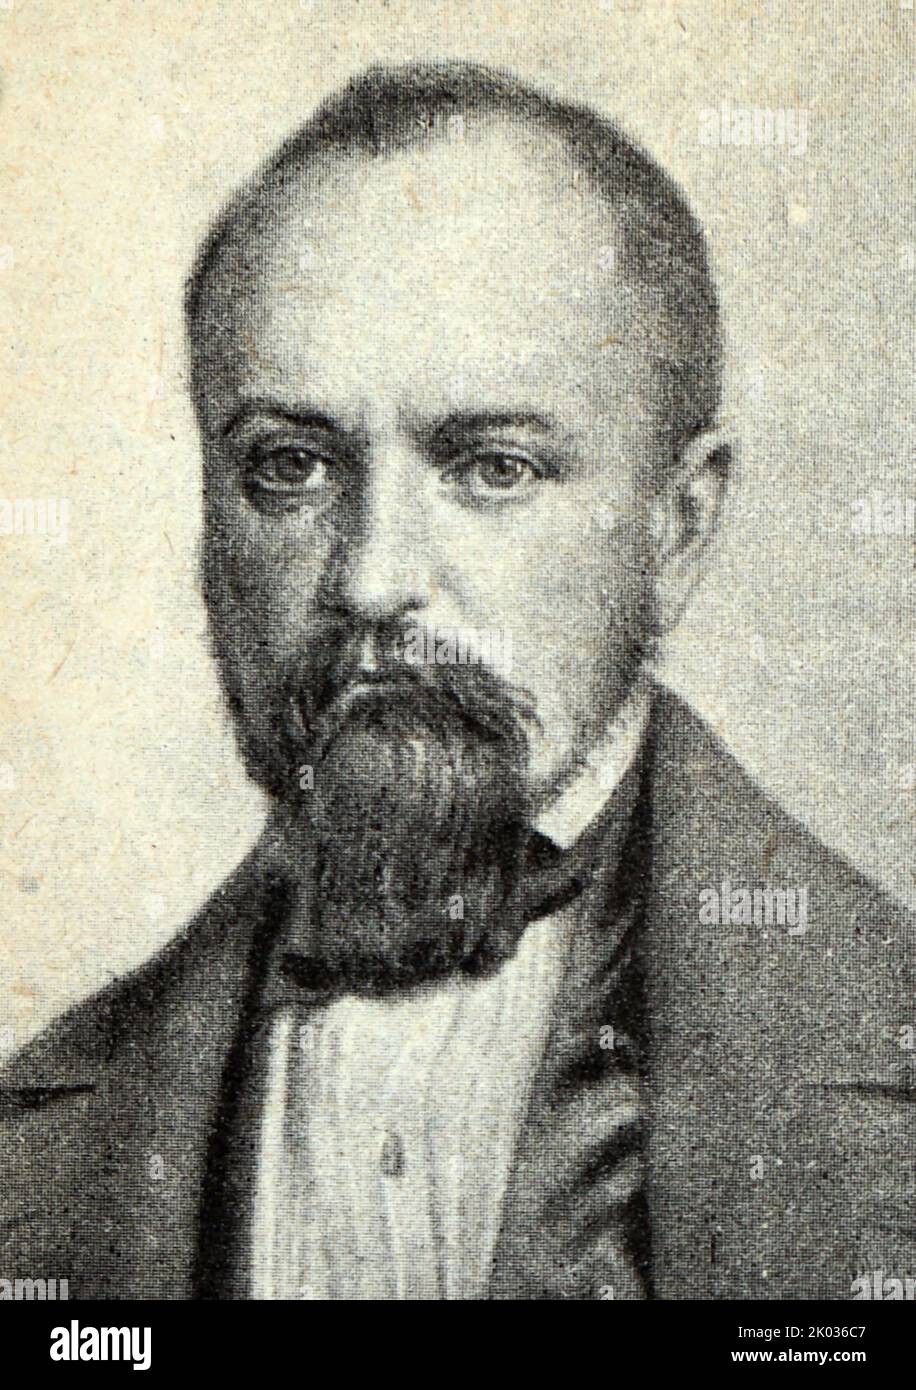 Alexander Ivanovich Herzen (1812 - 1870) Russian writer and thinker known as the 'father of Russian socialism' Stock Photo